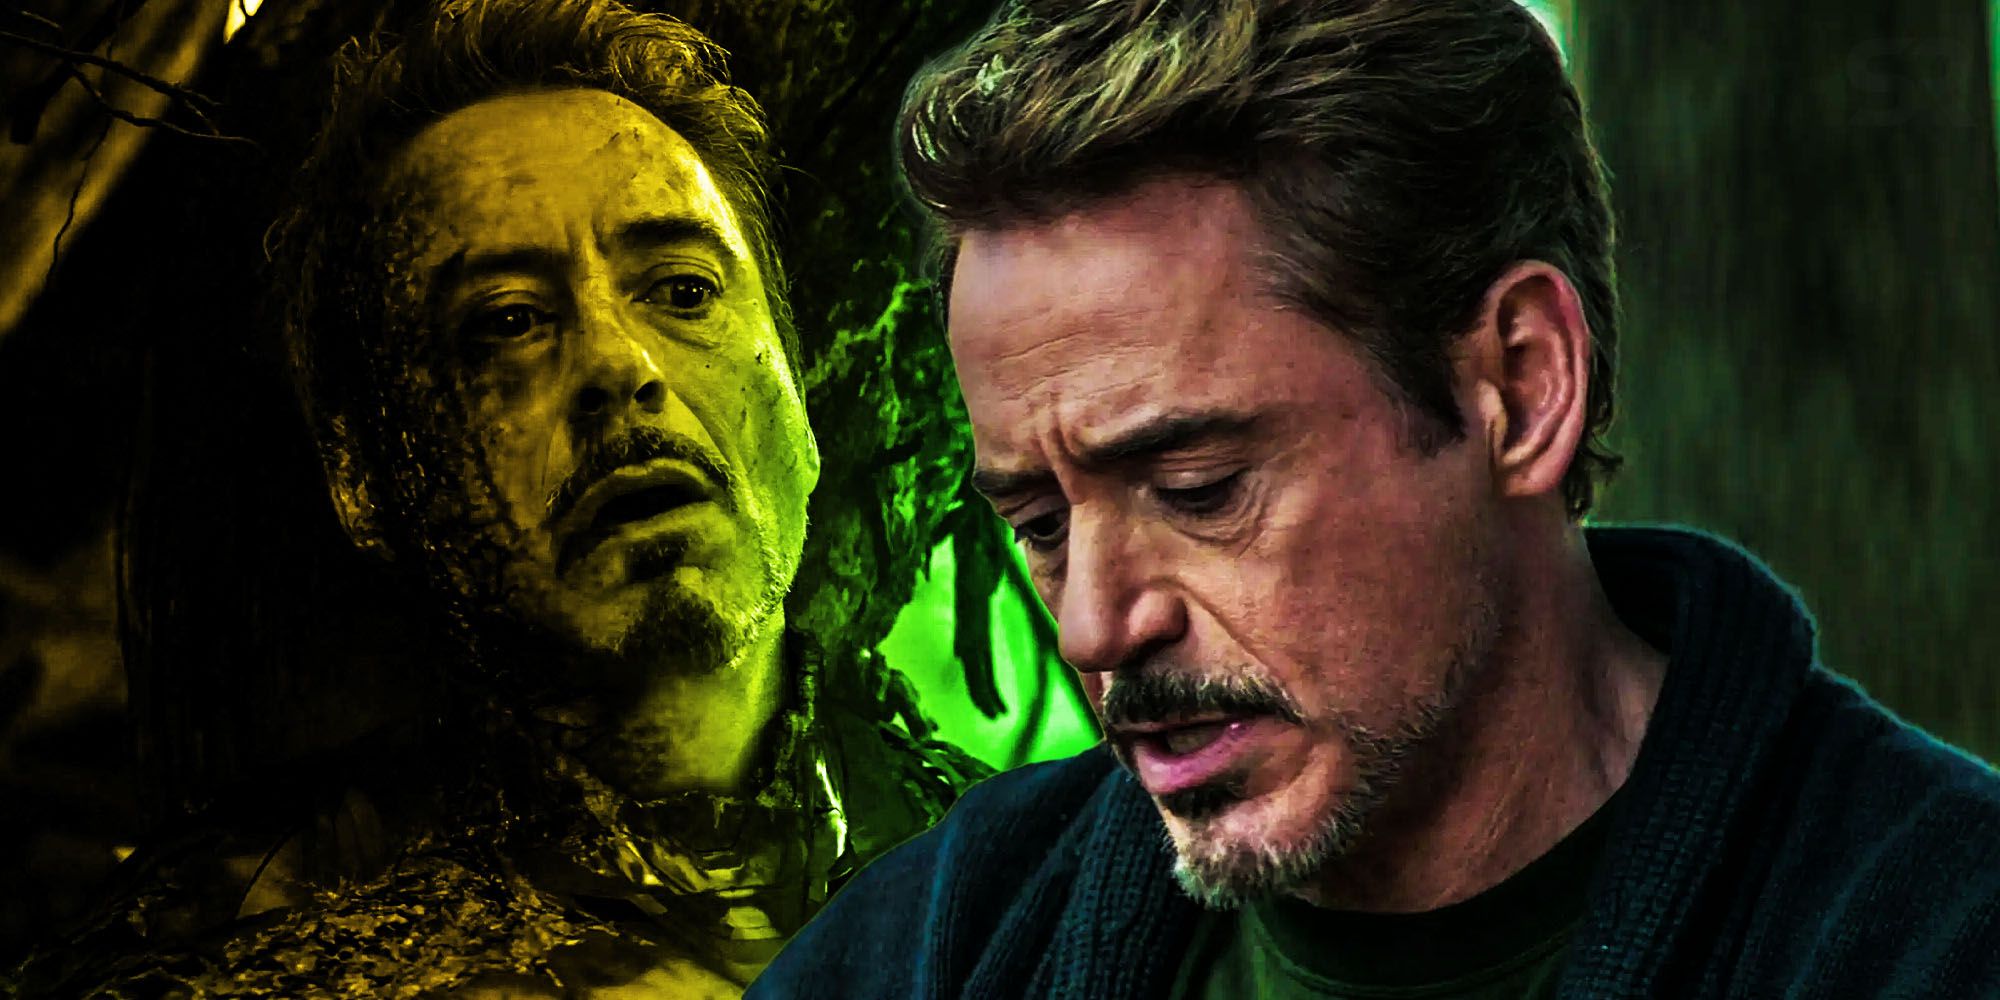 Tony Stark foreshadowed his own death in Avengers endgame